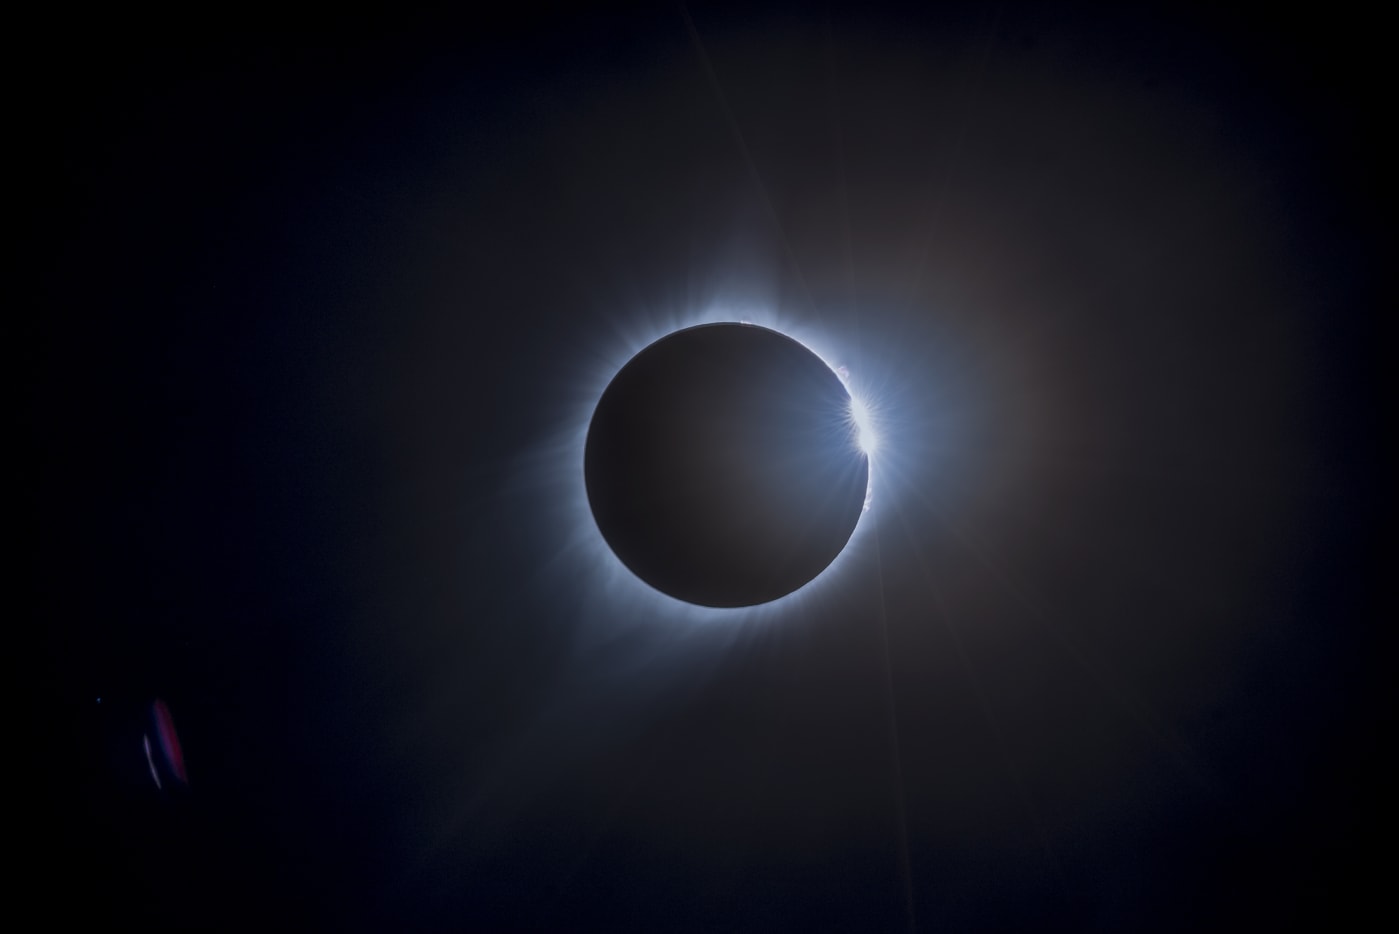 NASA will be studying the total solar eclipse. Here's how you can help